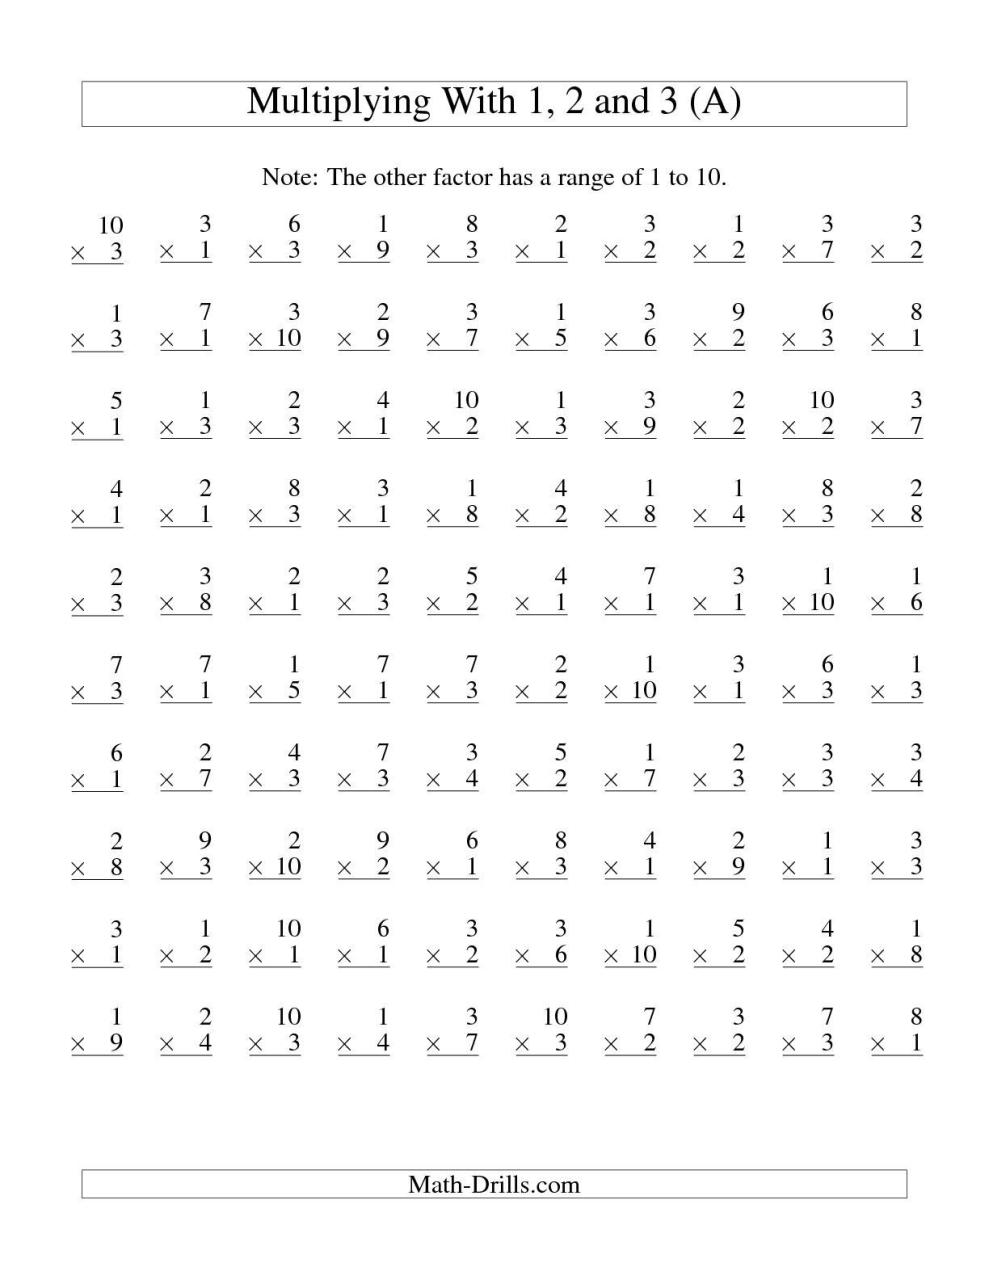 Multiplication Worksheets Printable 2s Learning How to Read